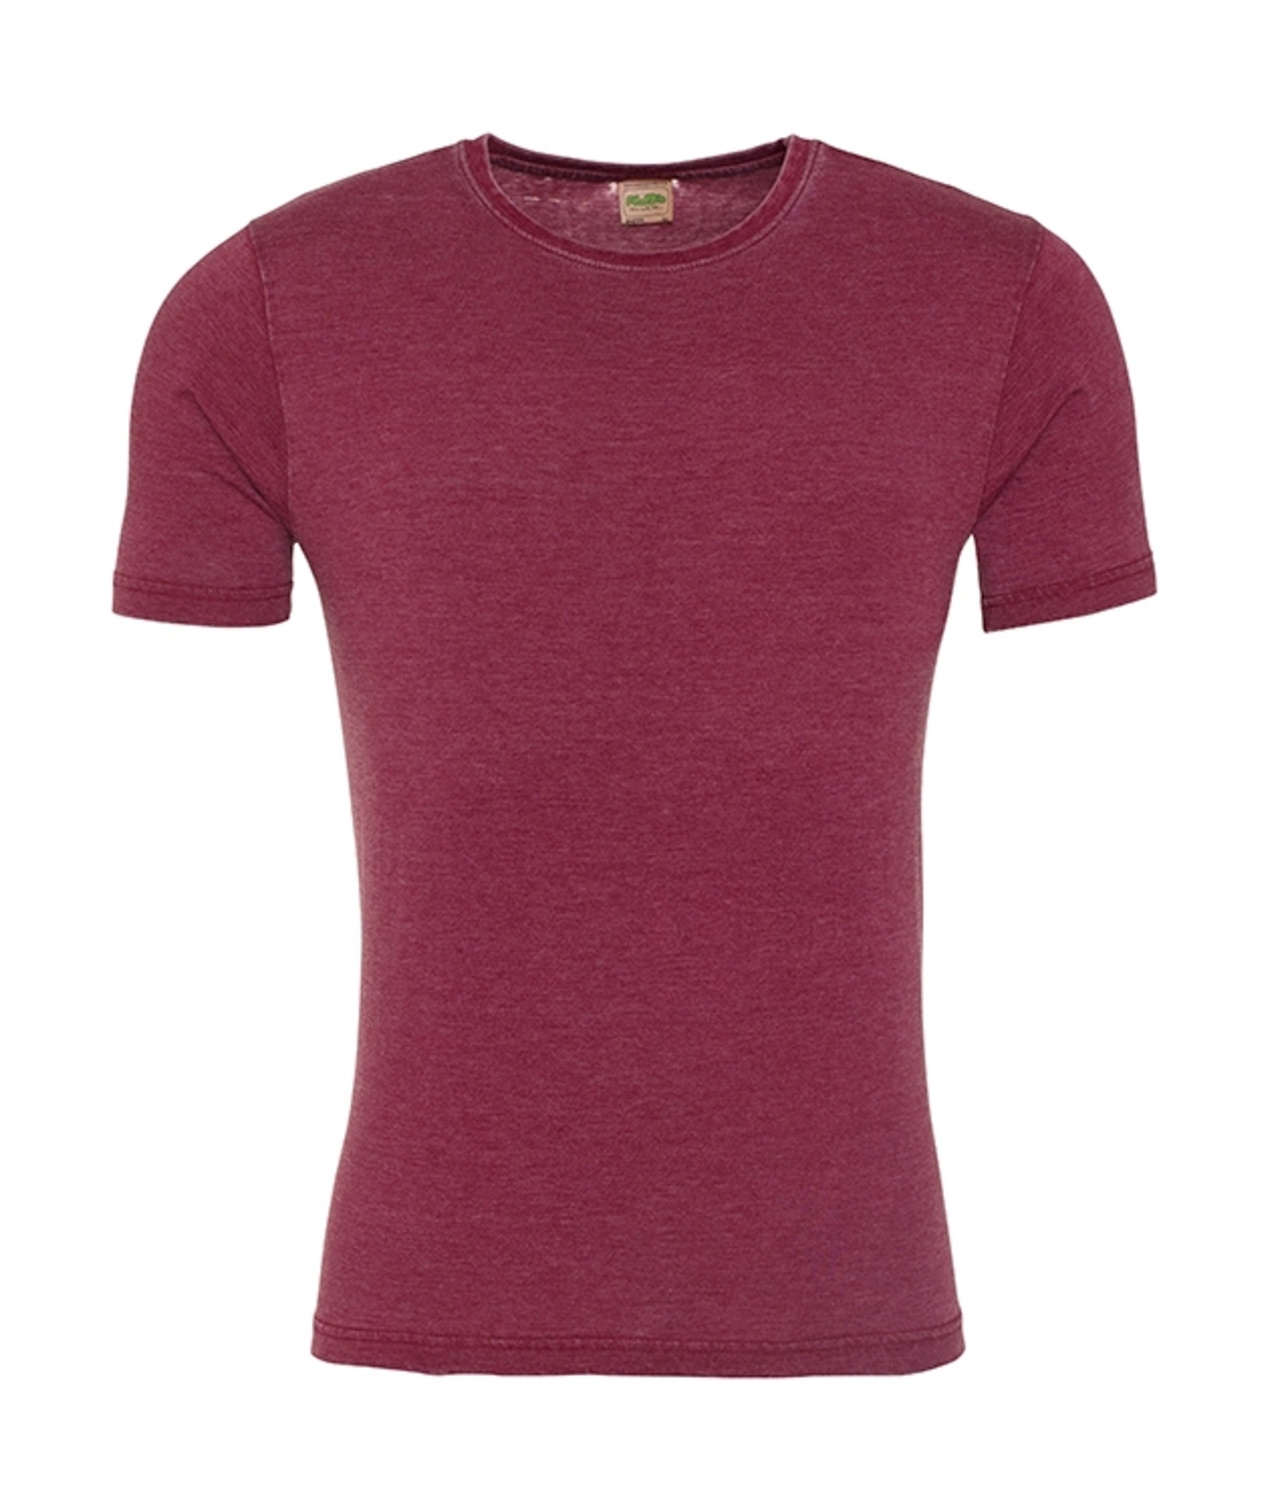 Just Ts Washed T - Burgundy - M